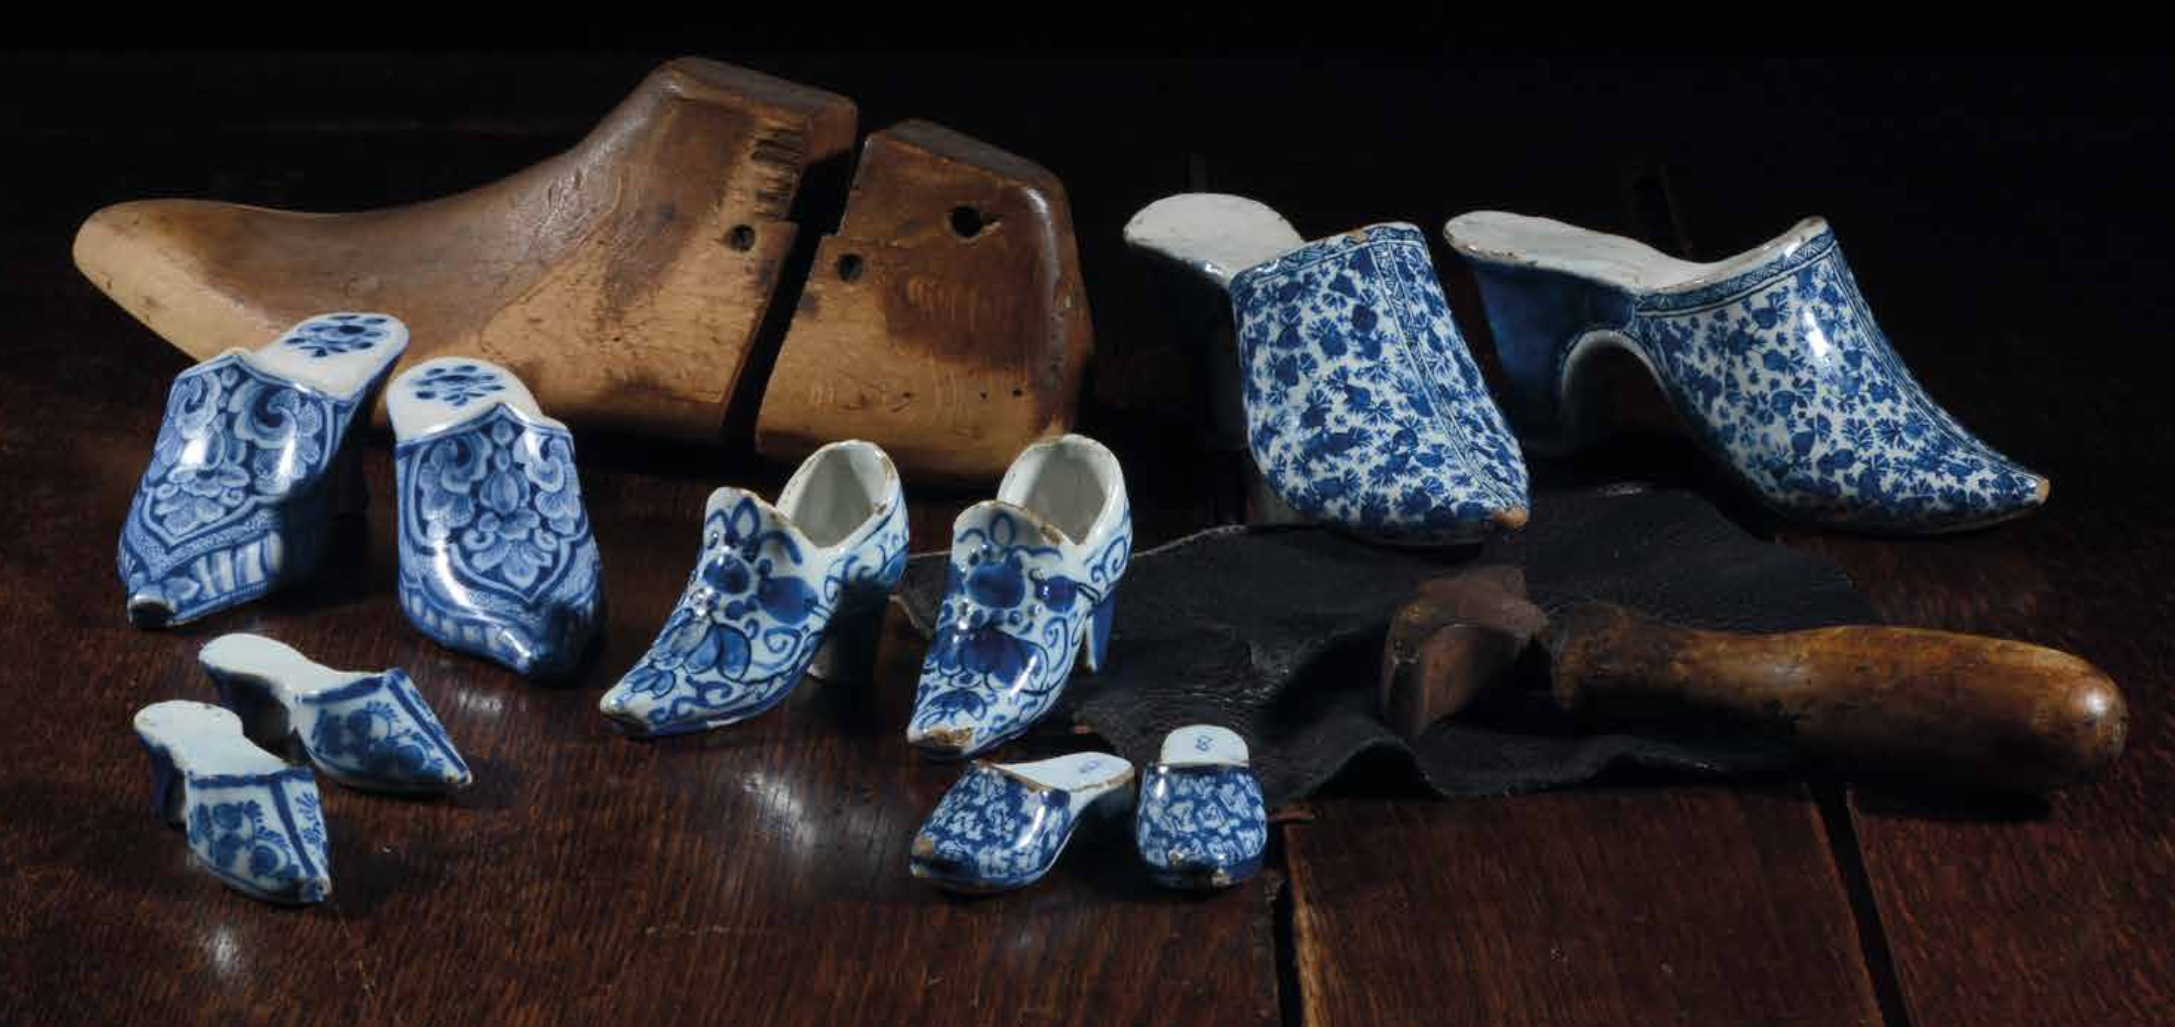 Pairs of Blue and White Shoes